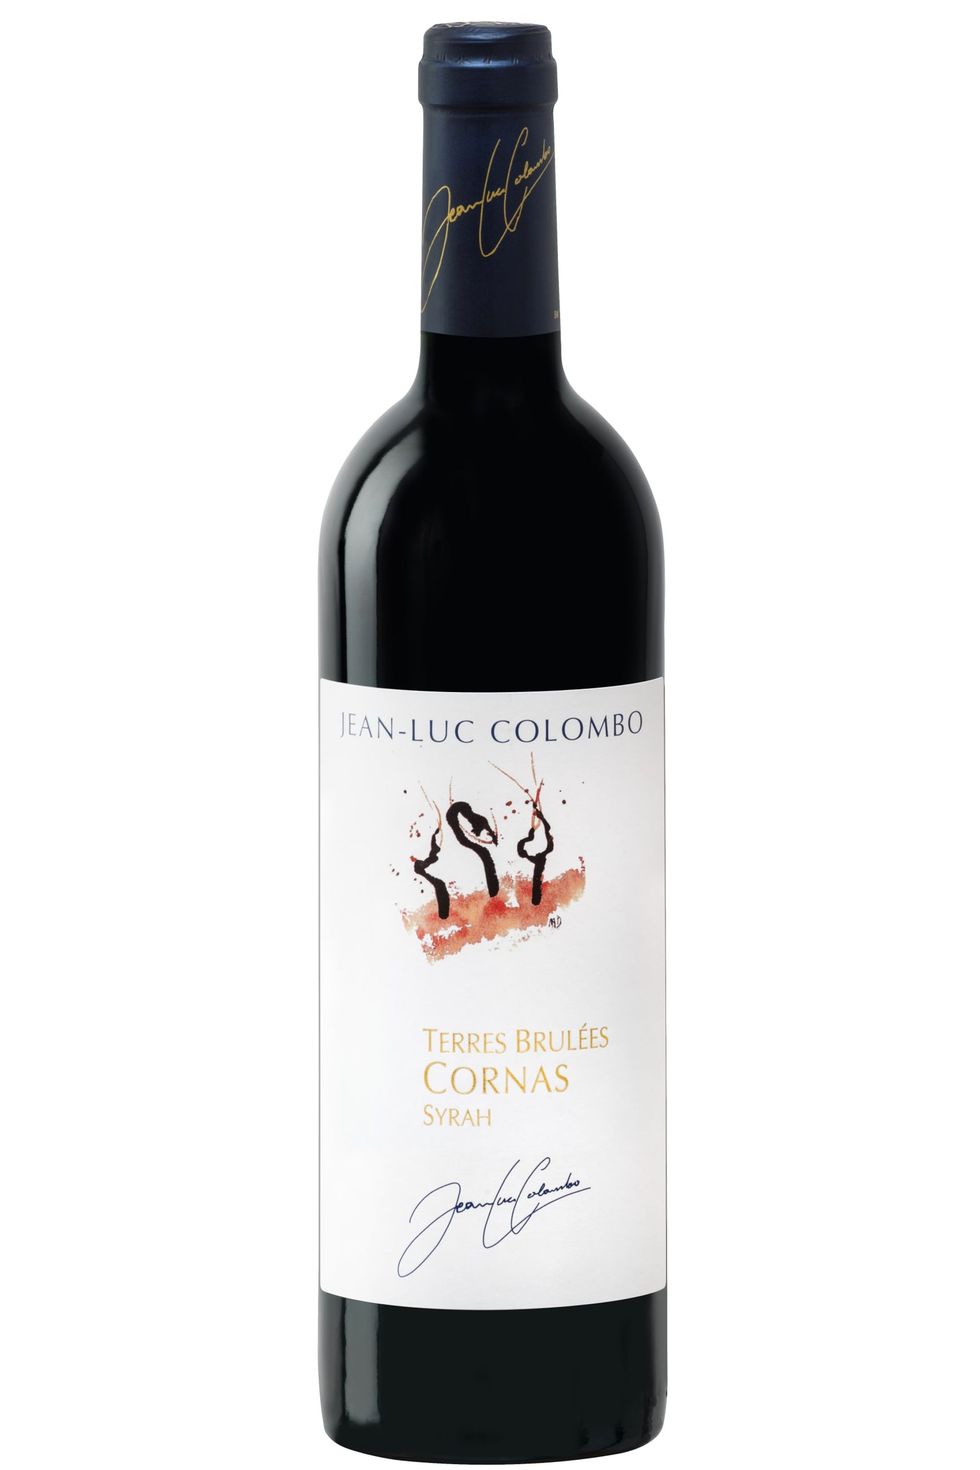 Jean-Luc Colombo Cornas Les Terres Brulees 2017